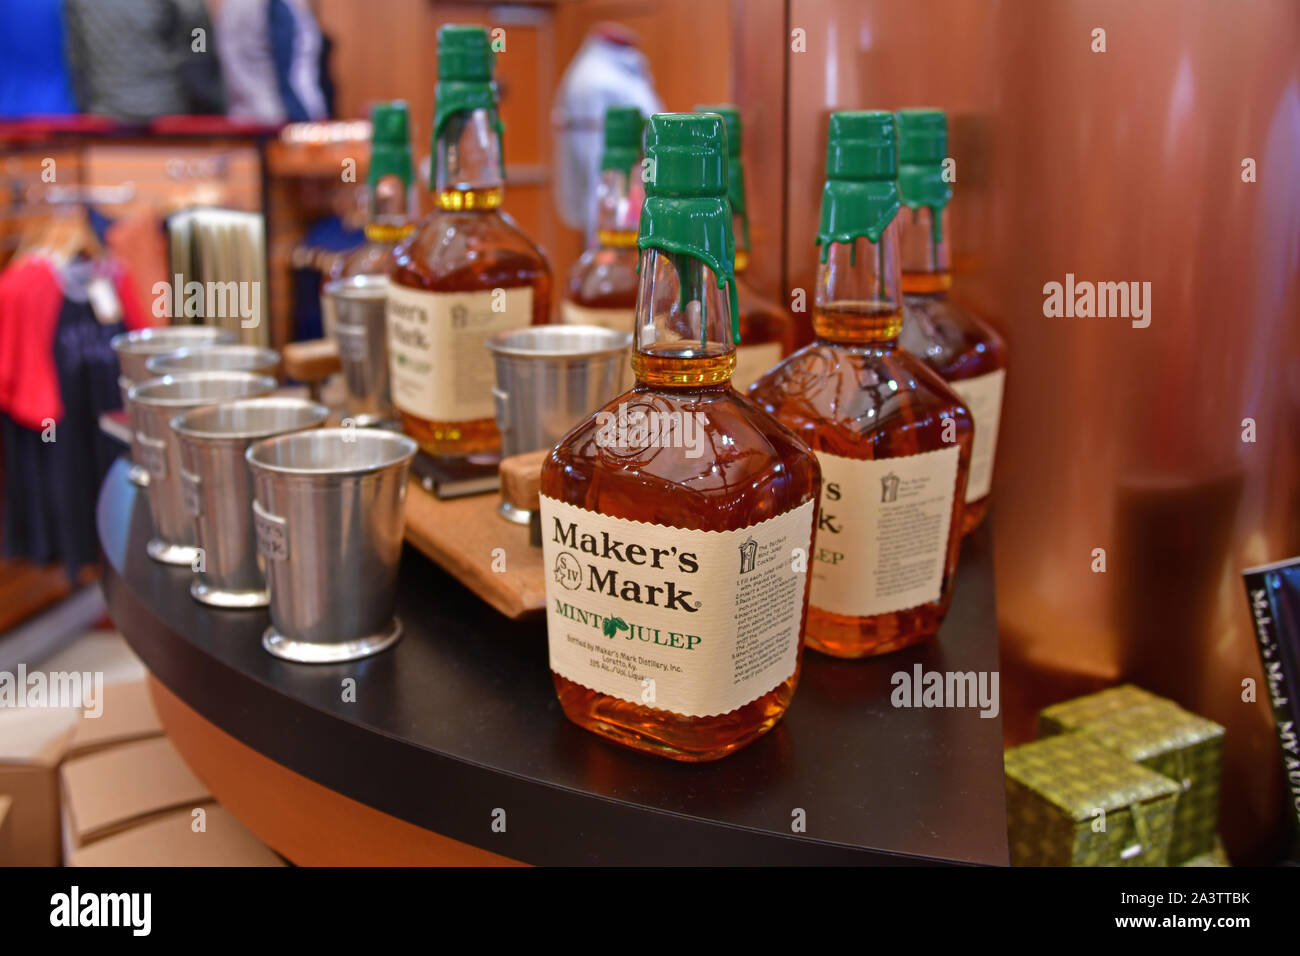 Loretto, KY, USA - September 28, 2019: At the end of the tour a small shop shows several bottles of Whiskey Maker's Mark Mint Julep for sale Stock Photo